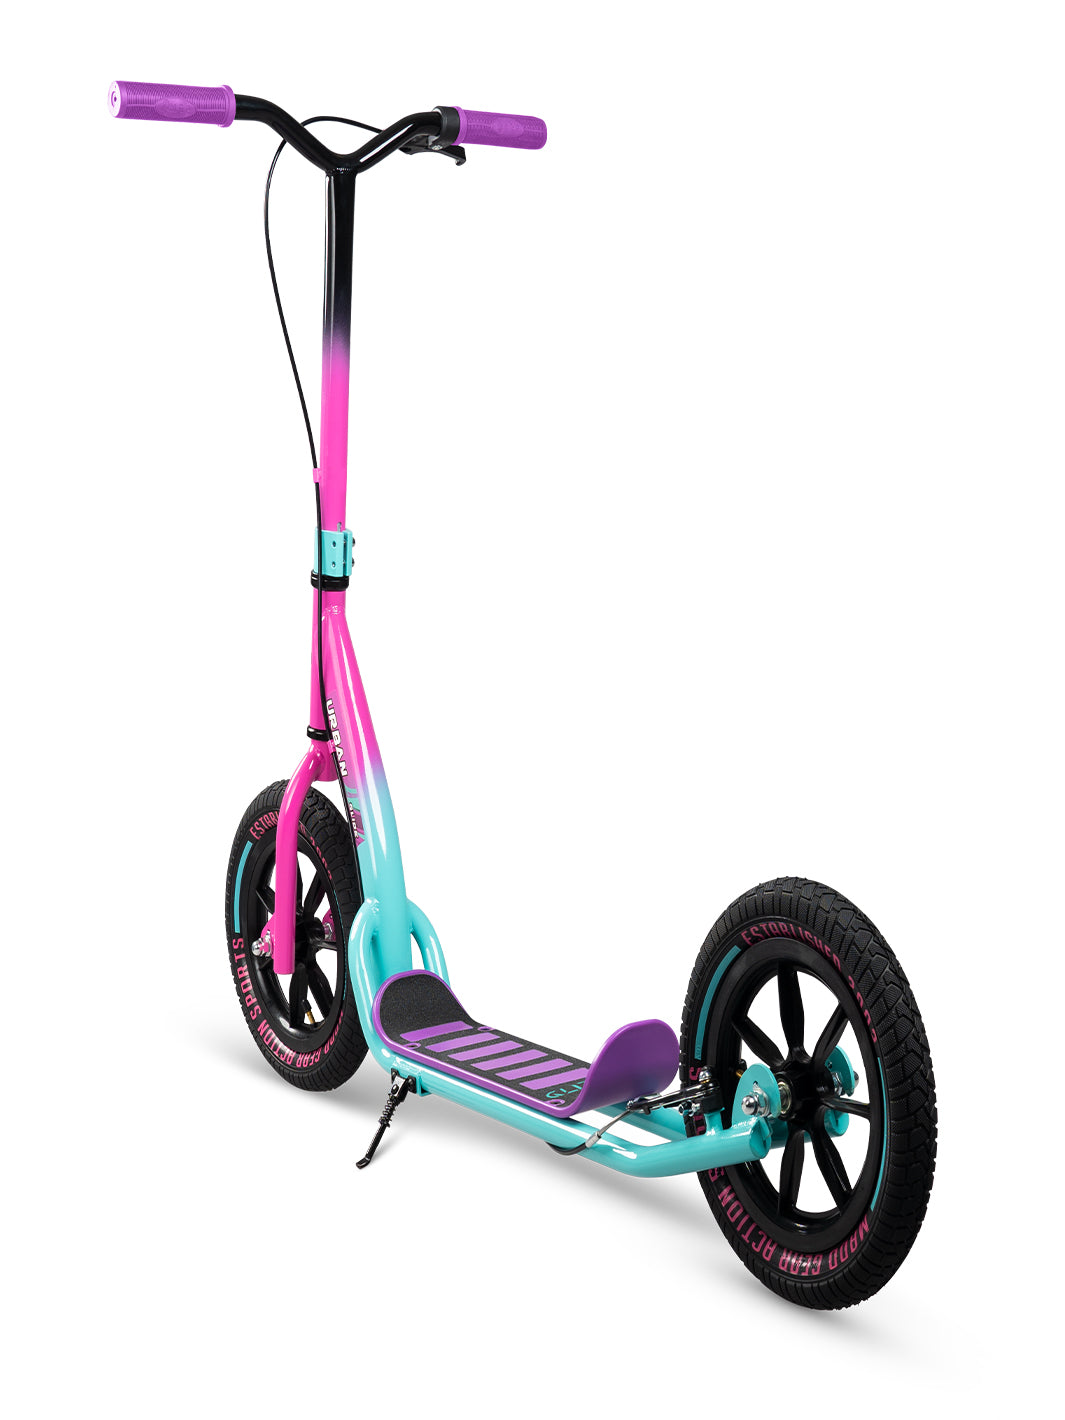 Adults Commuter Scooter Air Filled Tires Fast Smooth Large